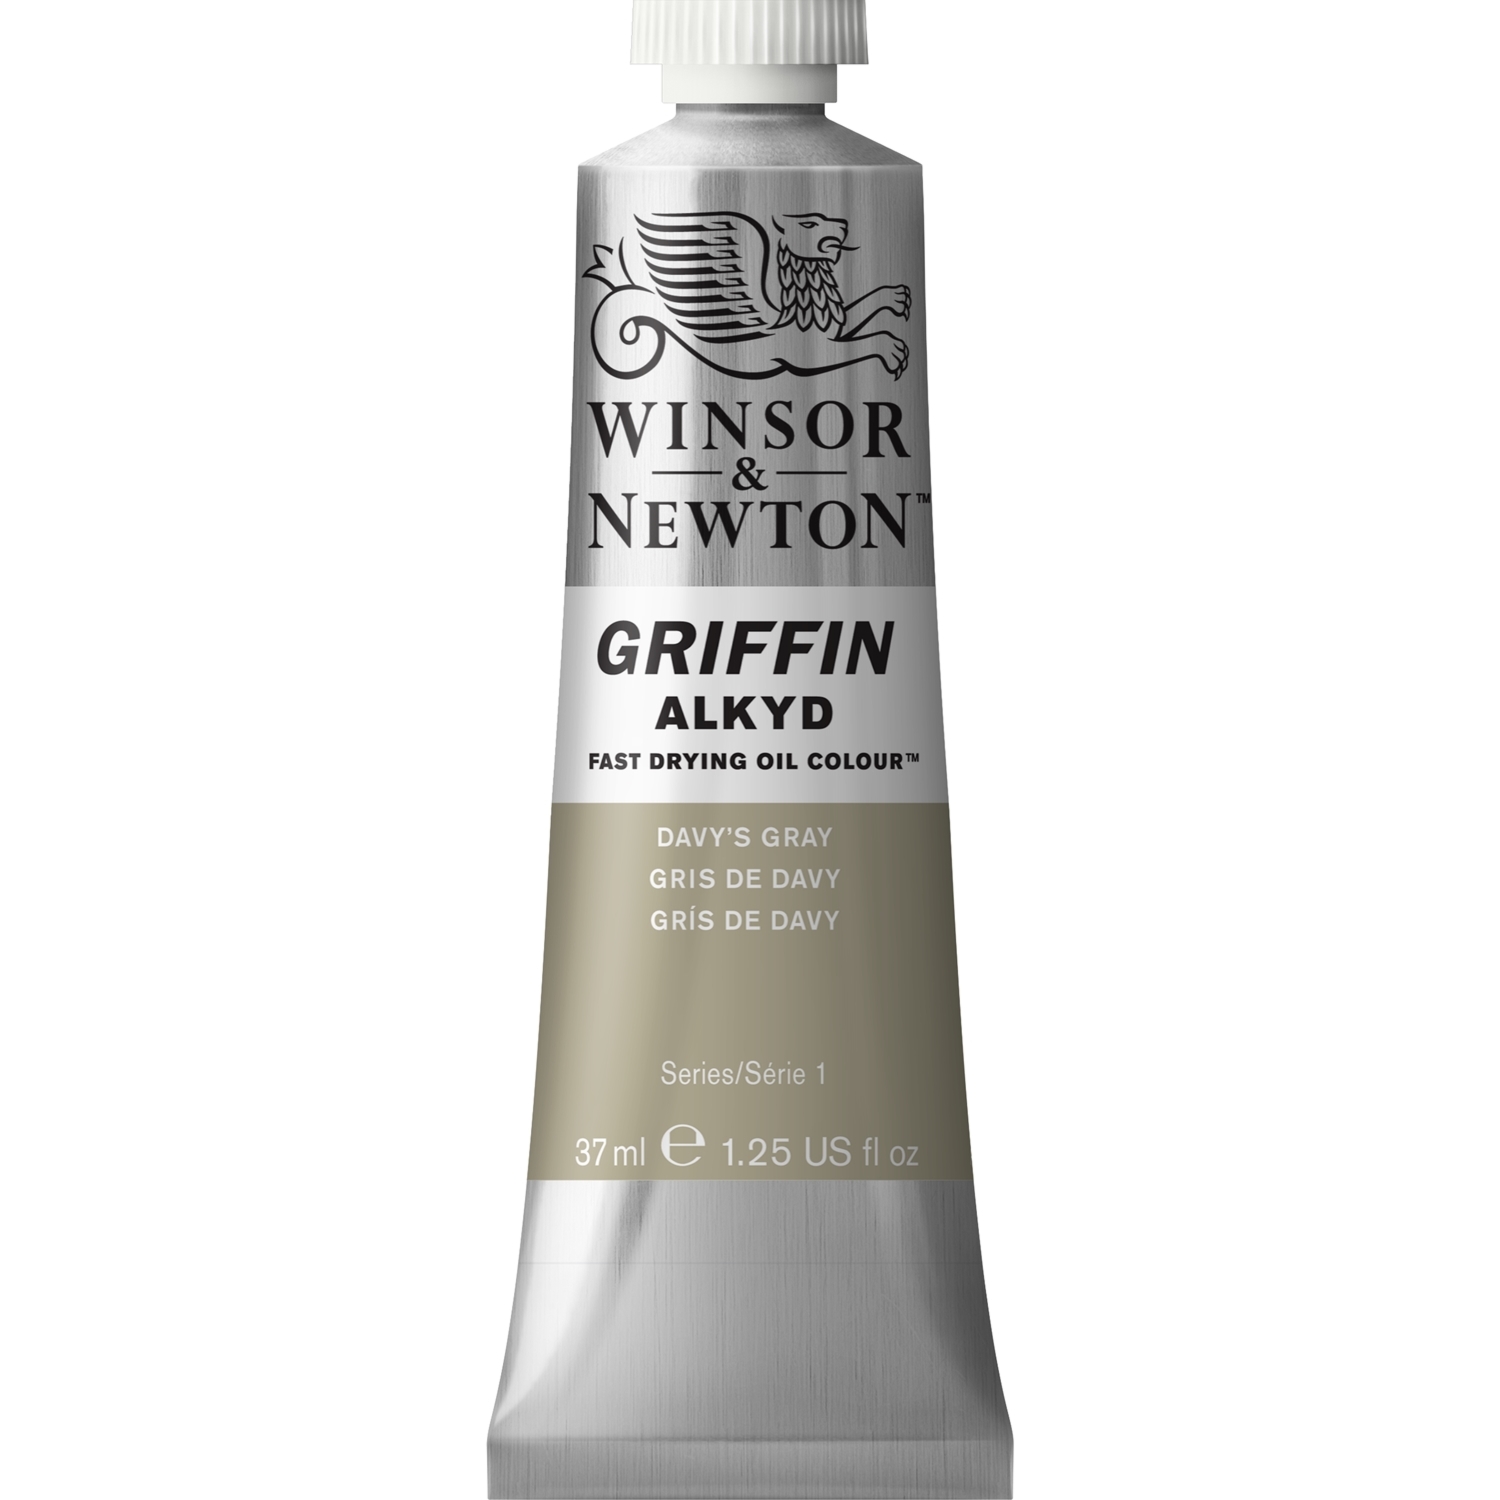 Winsor and Newton Griffin Alkyd Oil Colour - Davys Grey Image 1